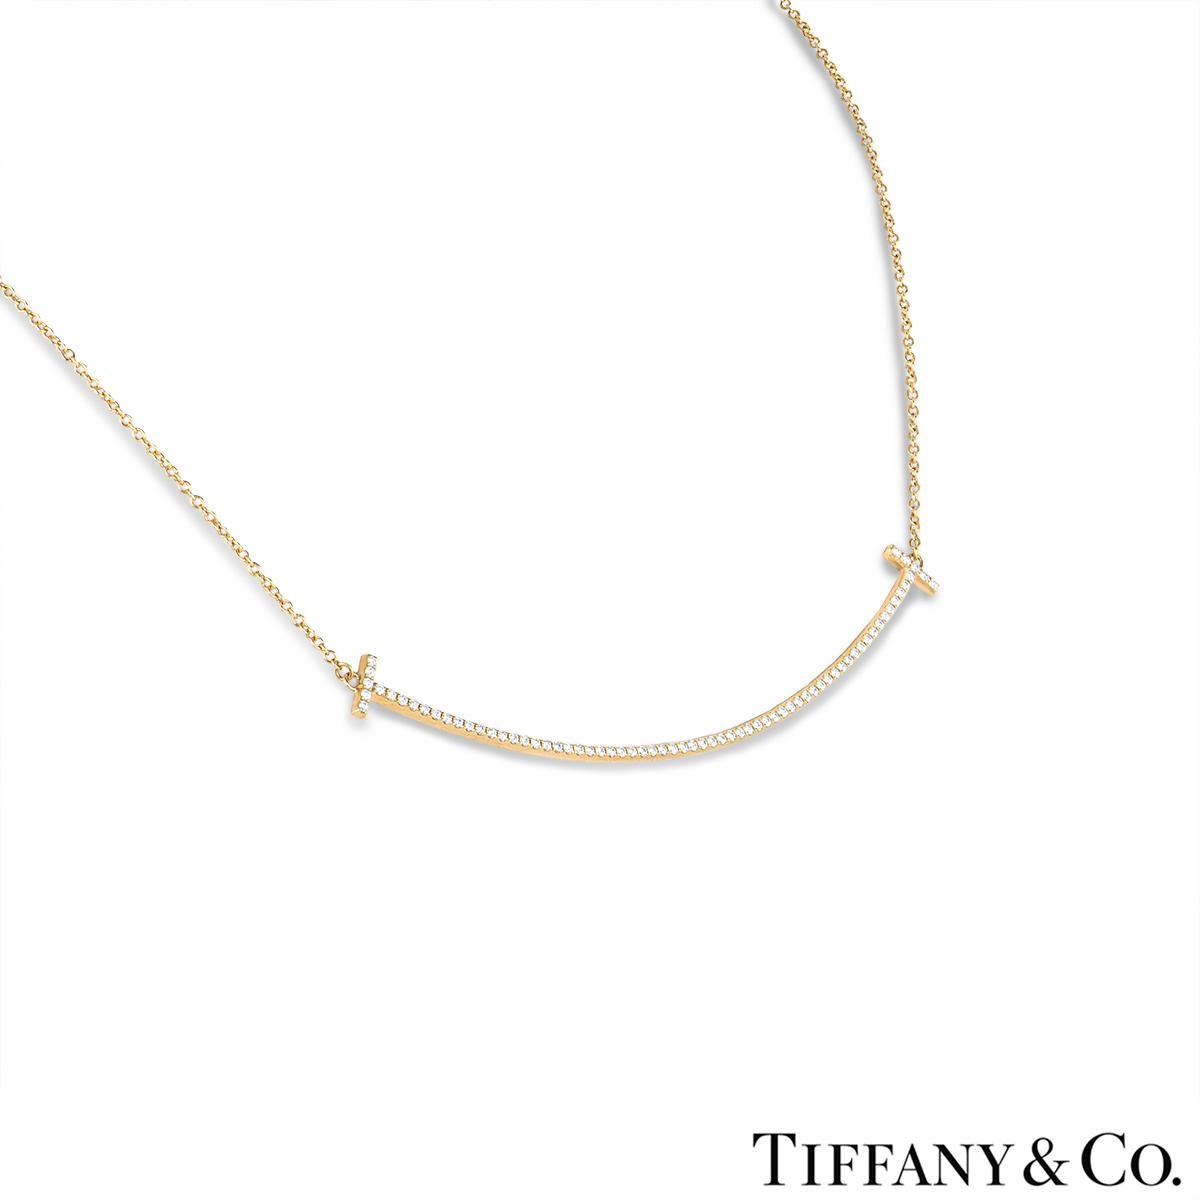 A charming 18k yellow gold diamond Tiffany & Co. pendant from the Tiffany T Smile collection. The pendant comprises of a smile motif pave set with 70 round brilliant cut diamonds with a total weight of 0.19ct, G+ colour and VS+ clarity. The pendant